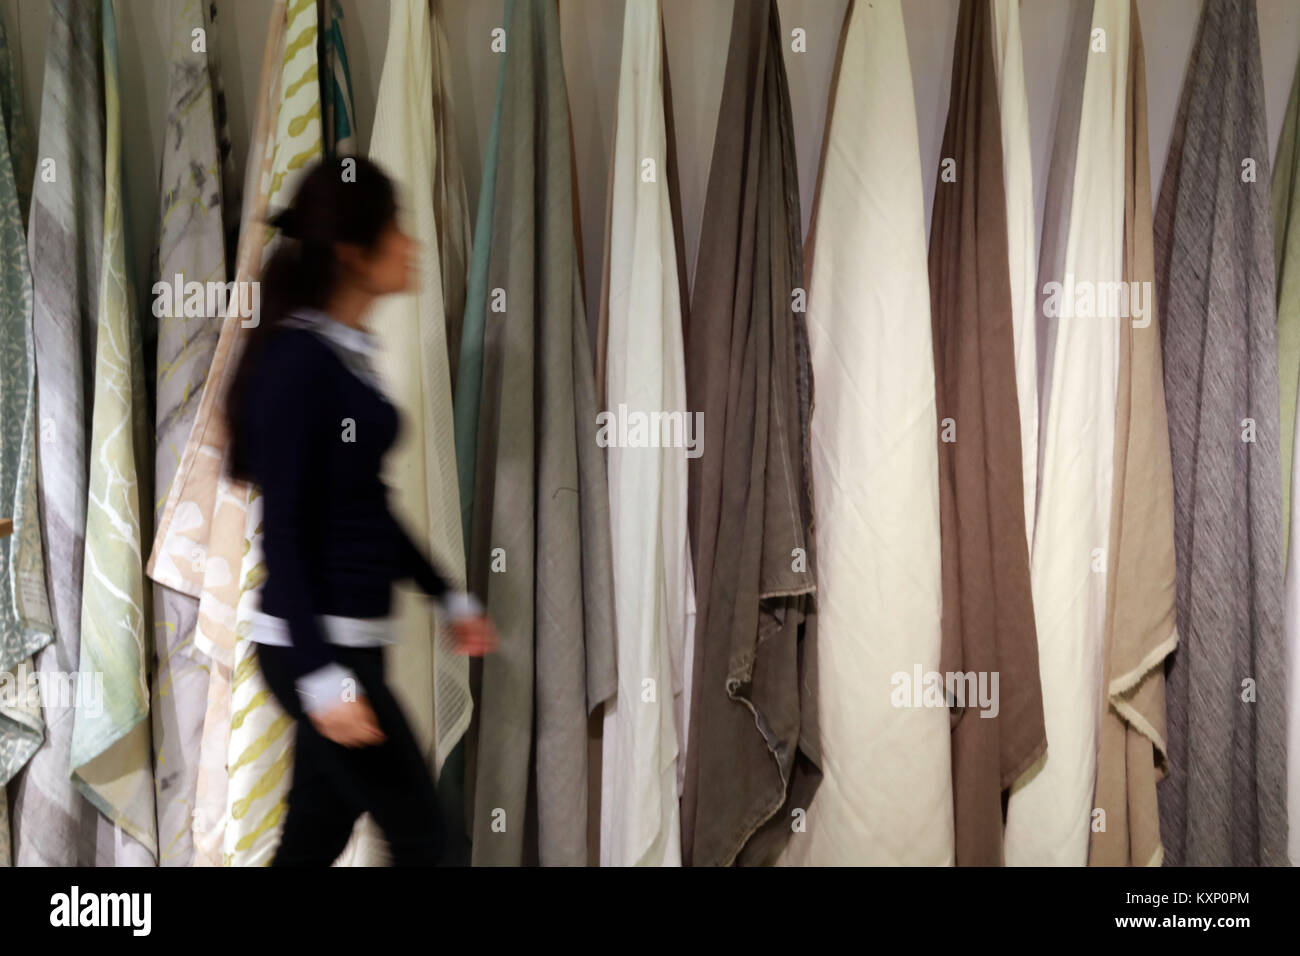 Frankfurt, Germany. 11th Jan, 2018. A woman works at a Chinese textile booth at Heimtextil, the world's largest international trade fair for home and contract textiles, in Frankfurt, Germany, on Jan. 11, 2018. A total of 2,975 exhibitors from 64 countries and regions attended the trade fair this year, 545 of which are from China. Credit: Luo Huanhuan/Xinhua/Alamy Live News Stock Photo